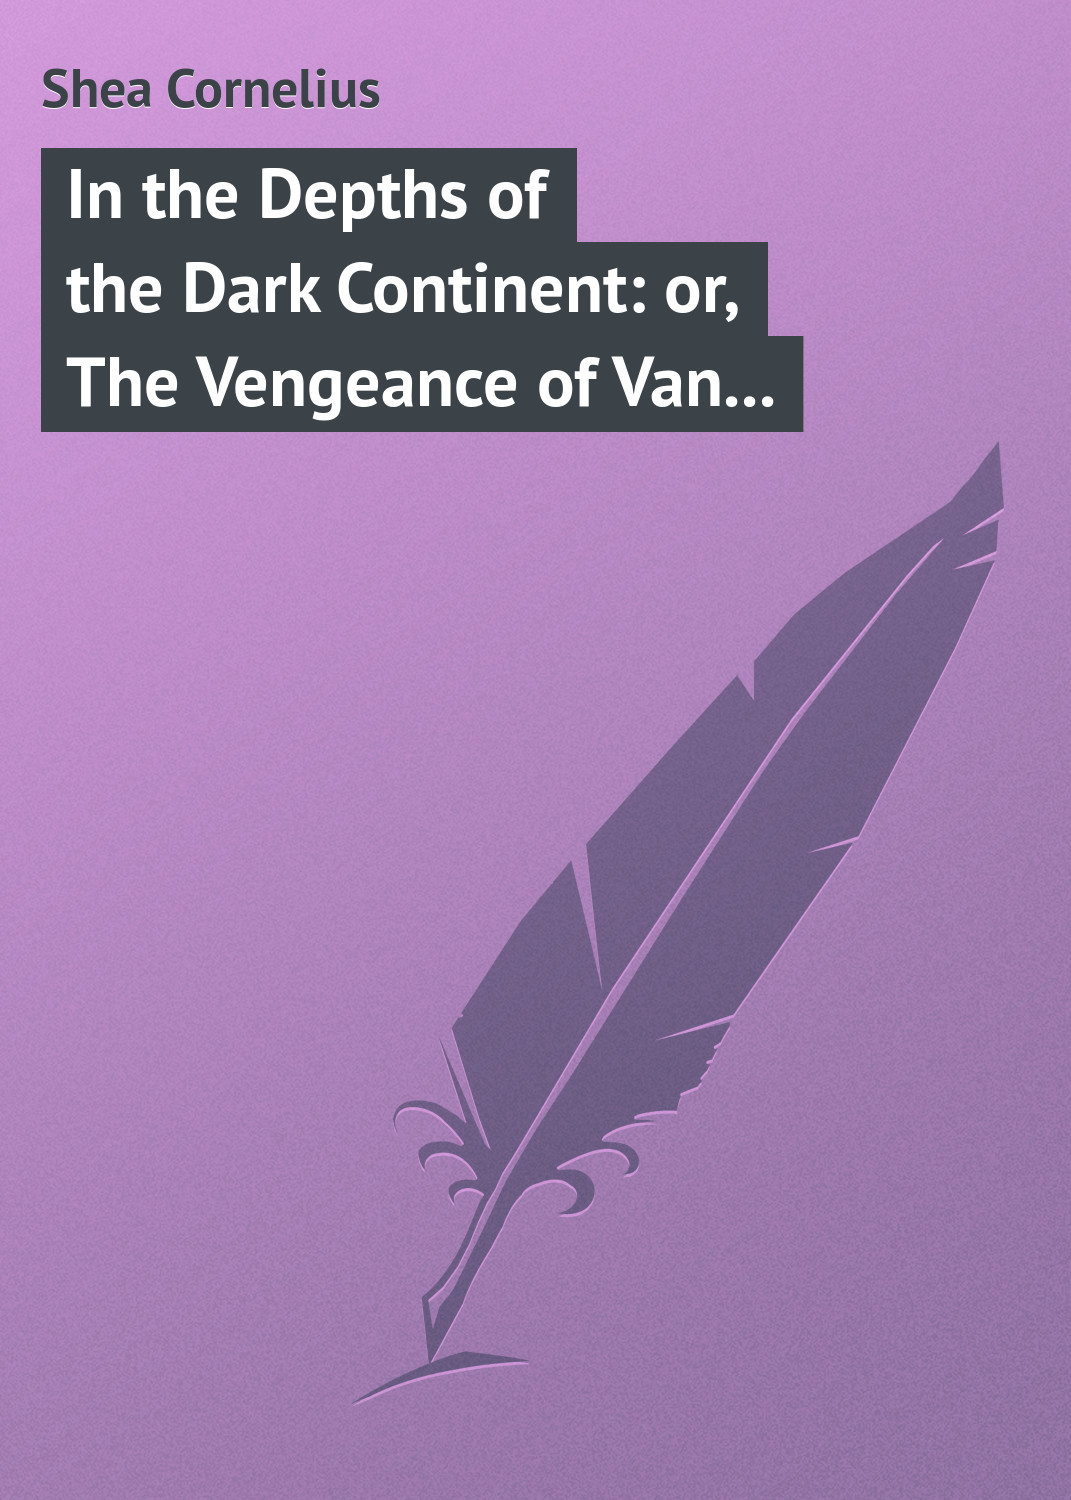 In the Depths of the Dark Continent: or, The Vengeance of Van Vincent